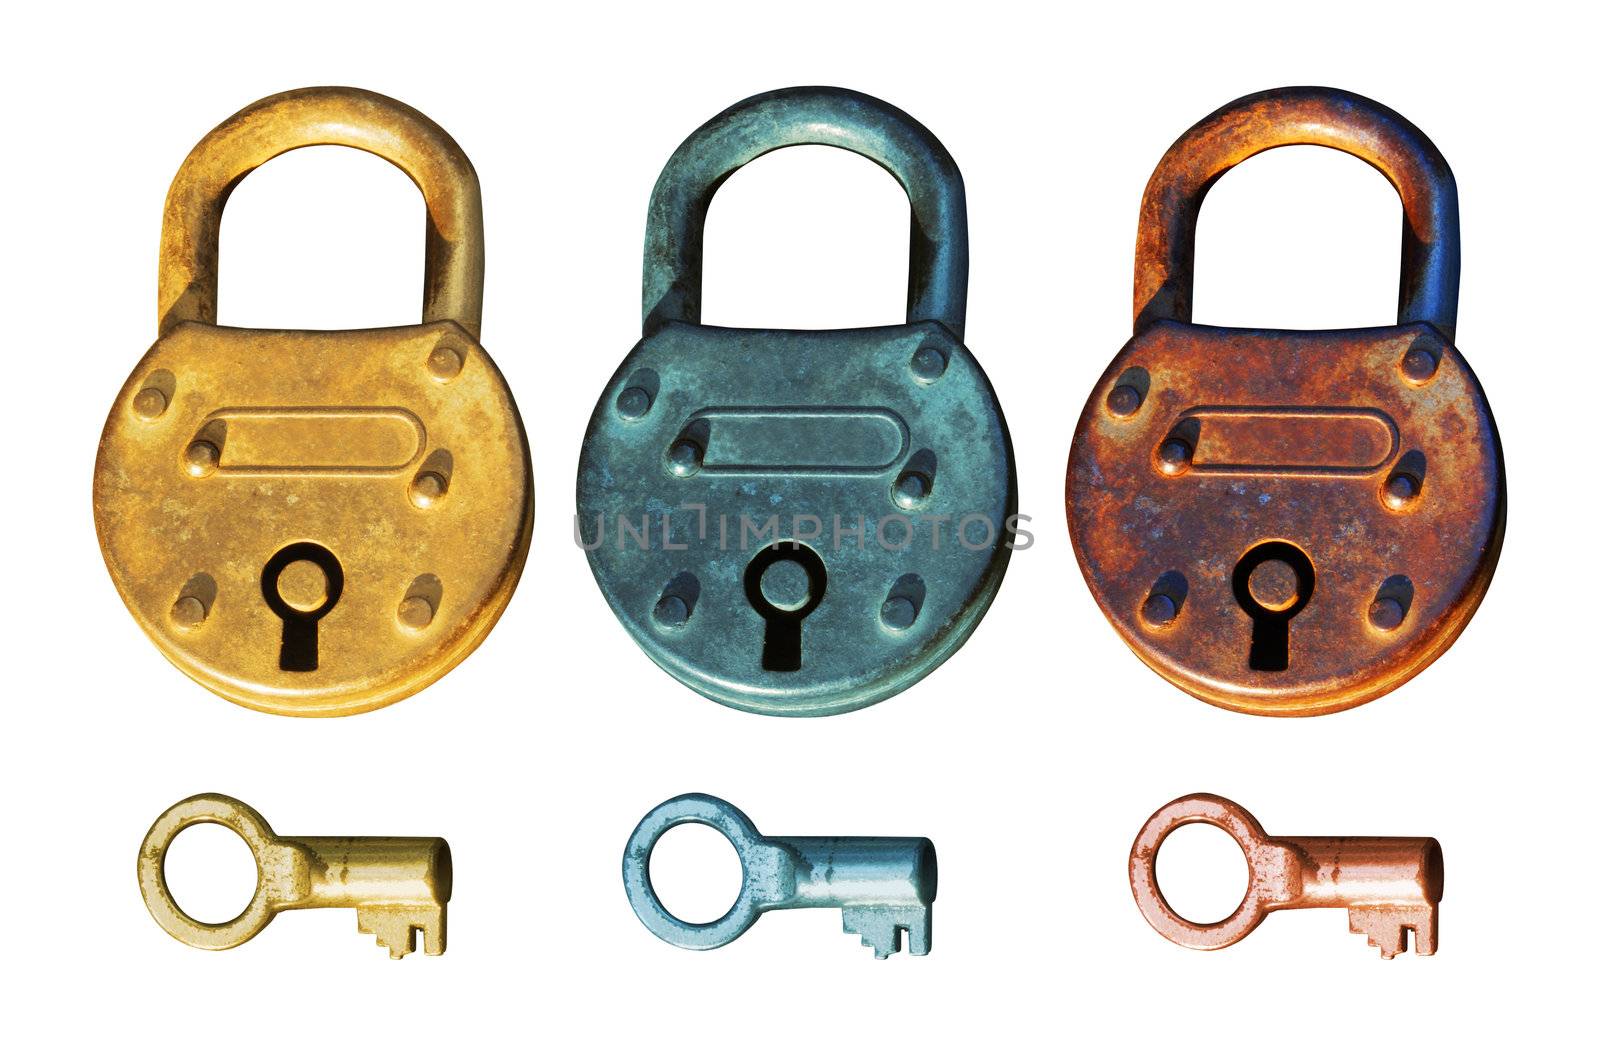 Antique Padlock group by cienpies